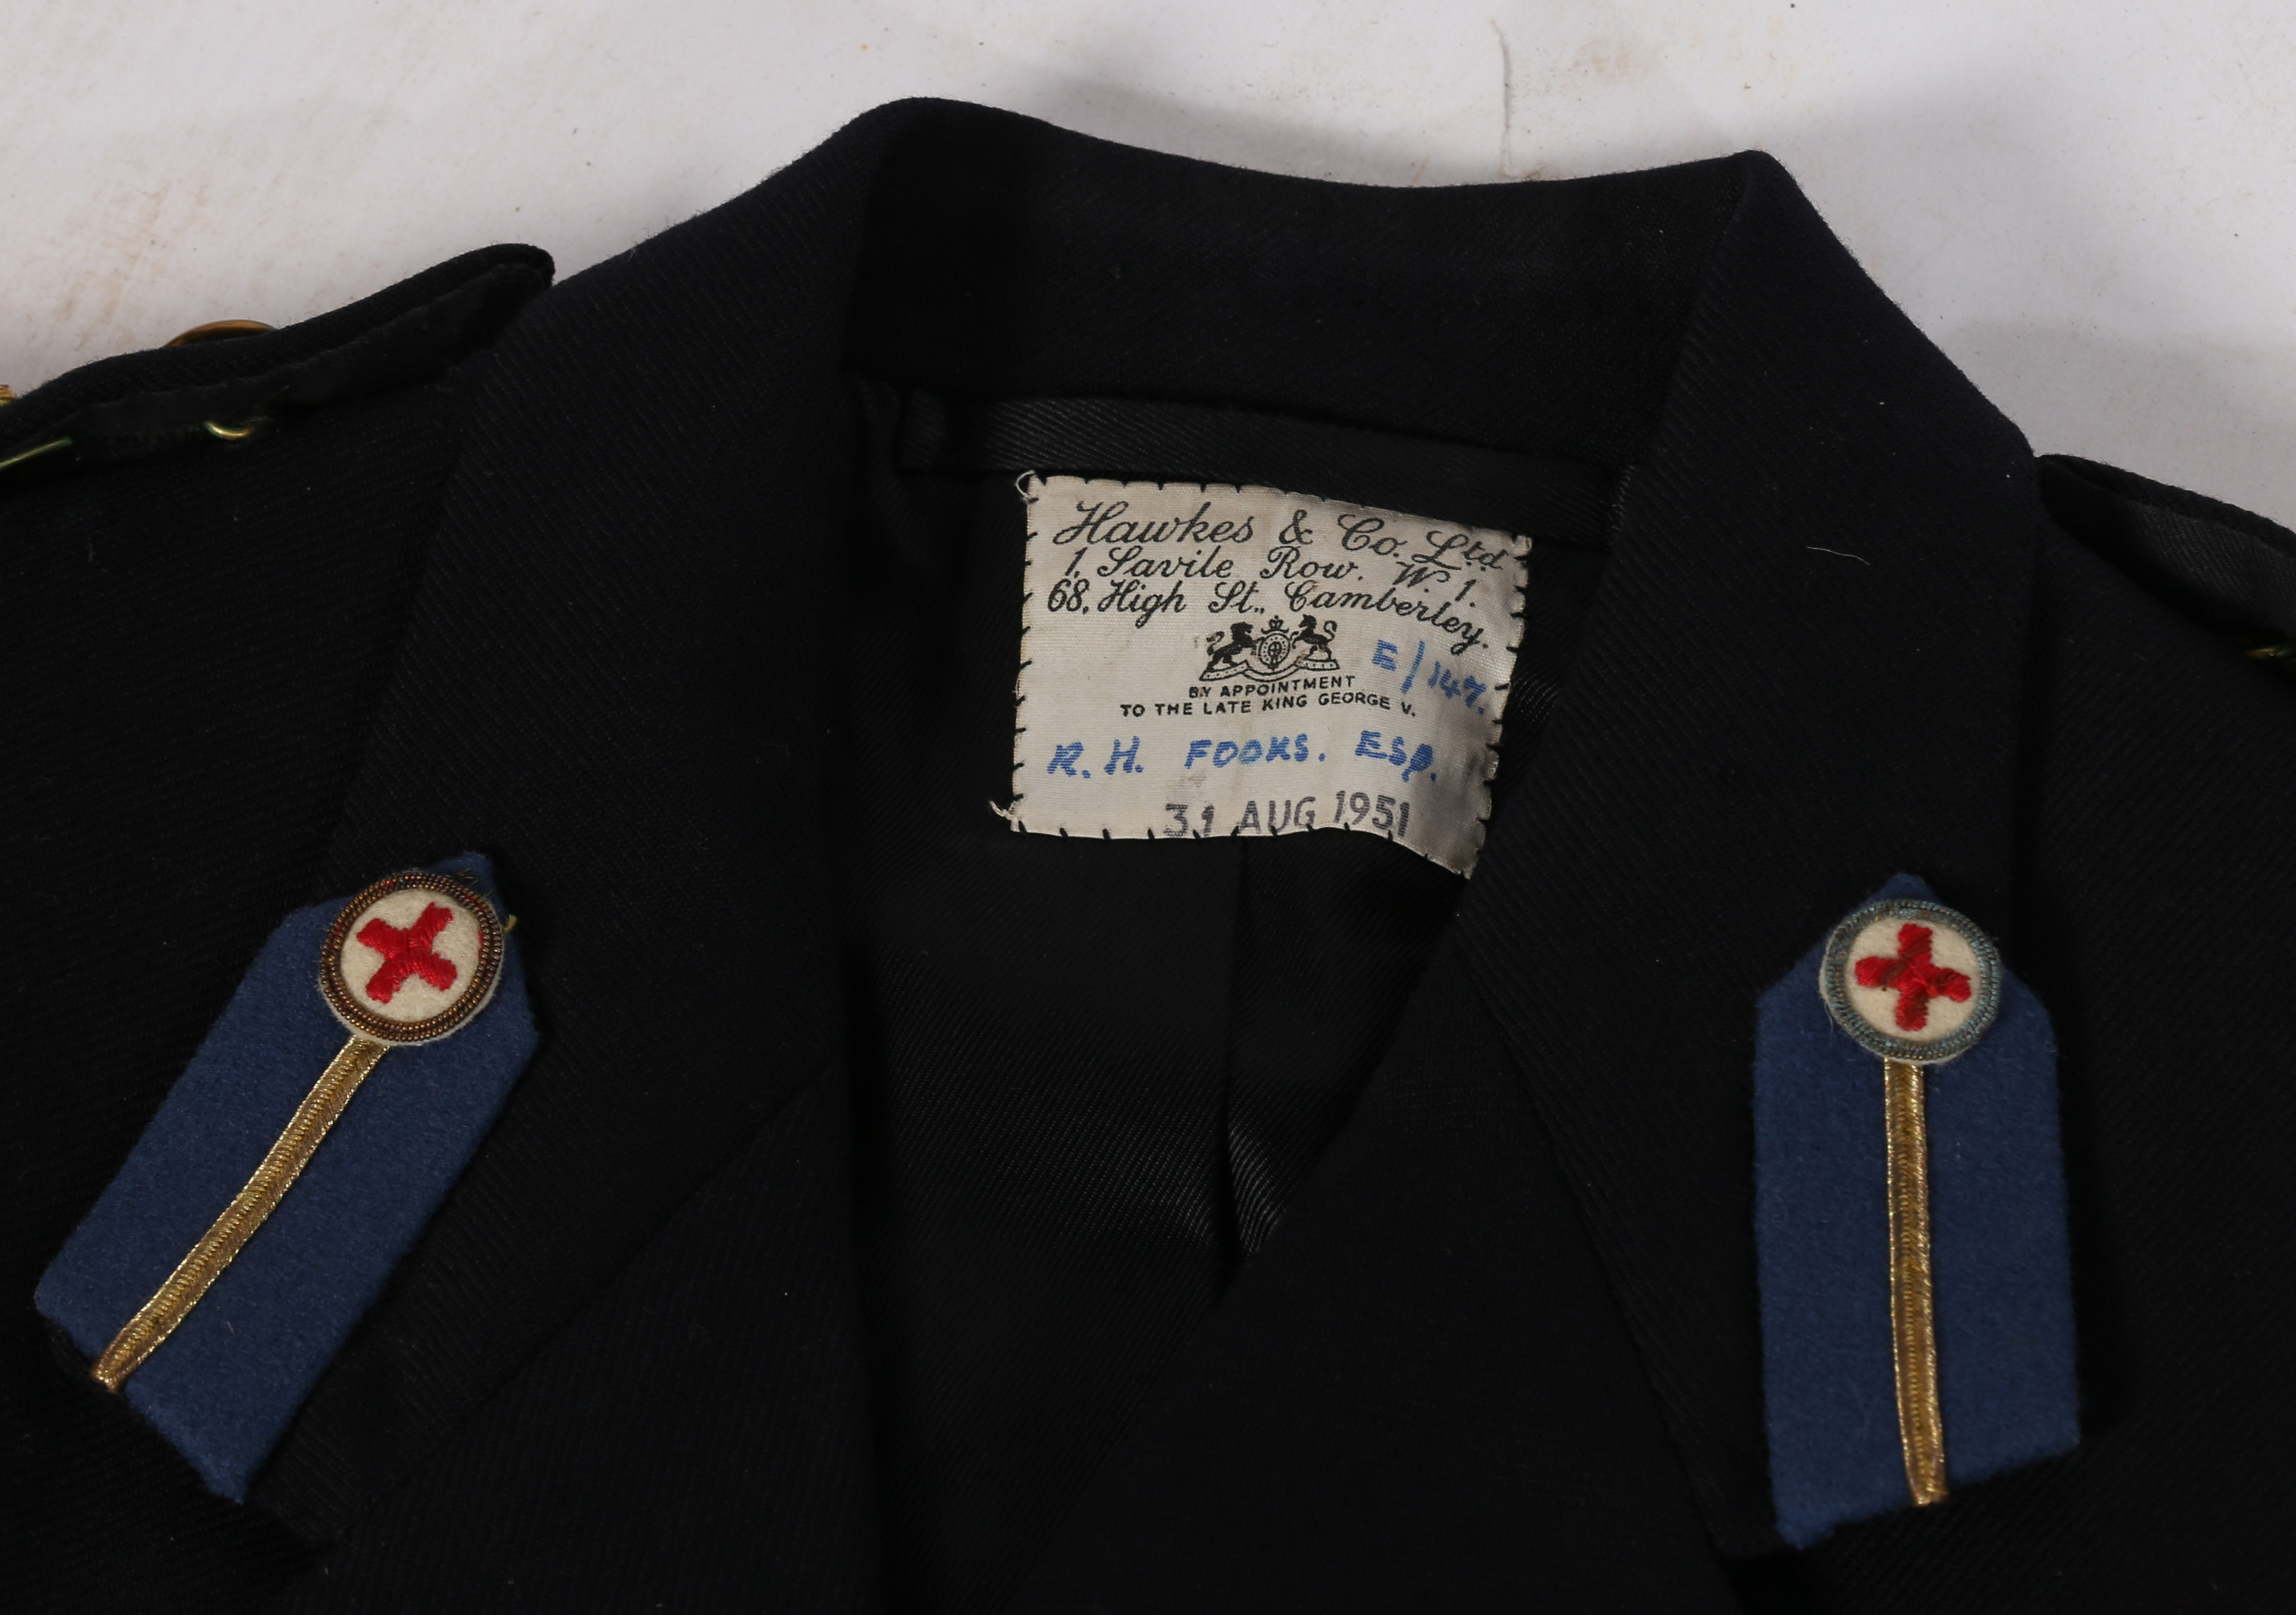 Grouping of British Red Cross uniforms, Jacket and Trousers, British Red Cross buttons - Image 5 of 10